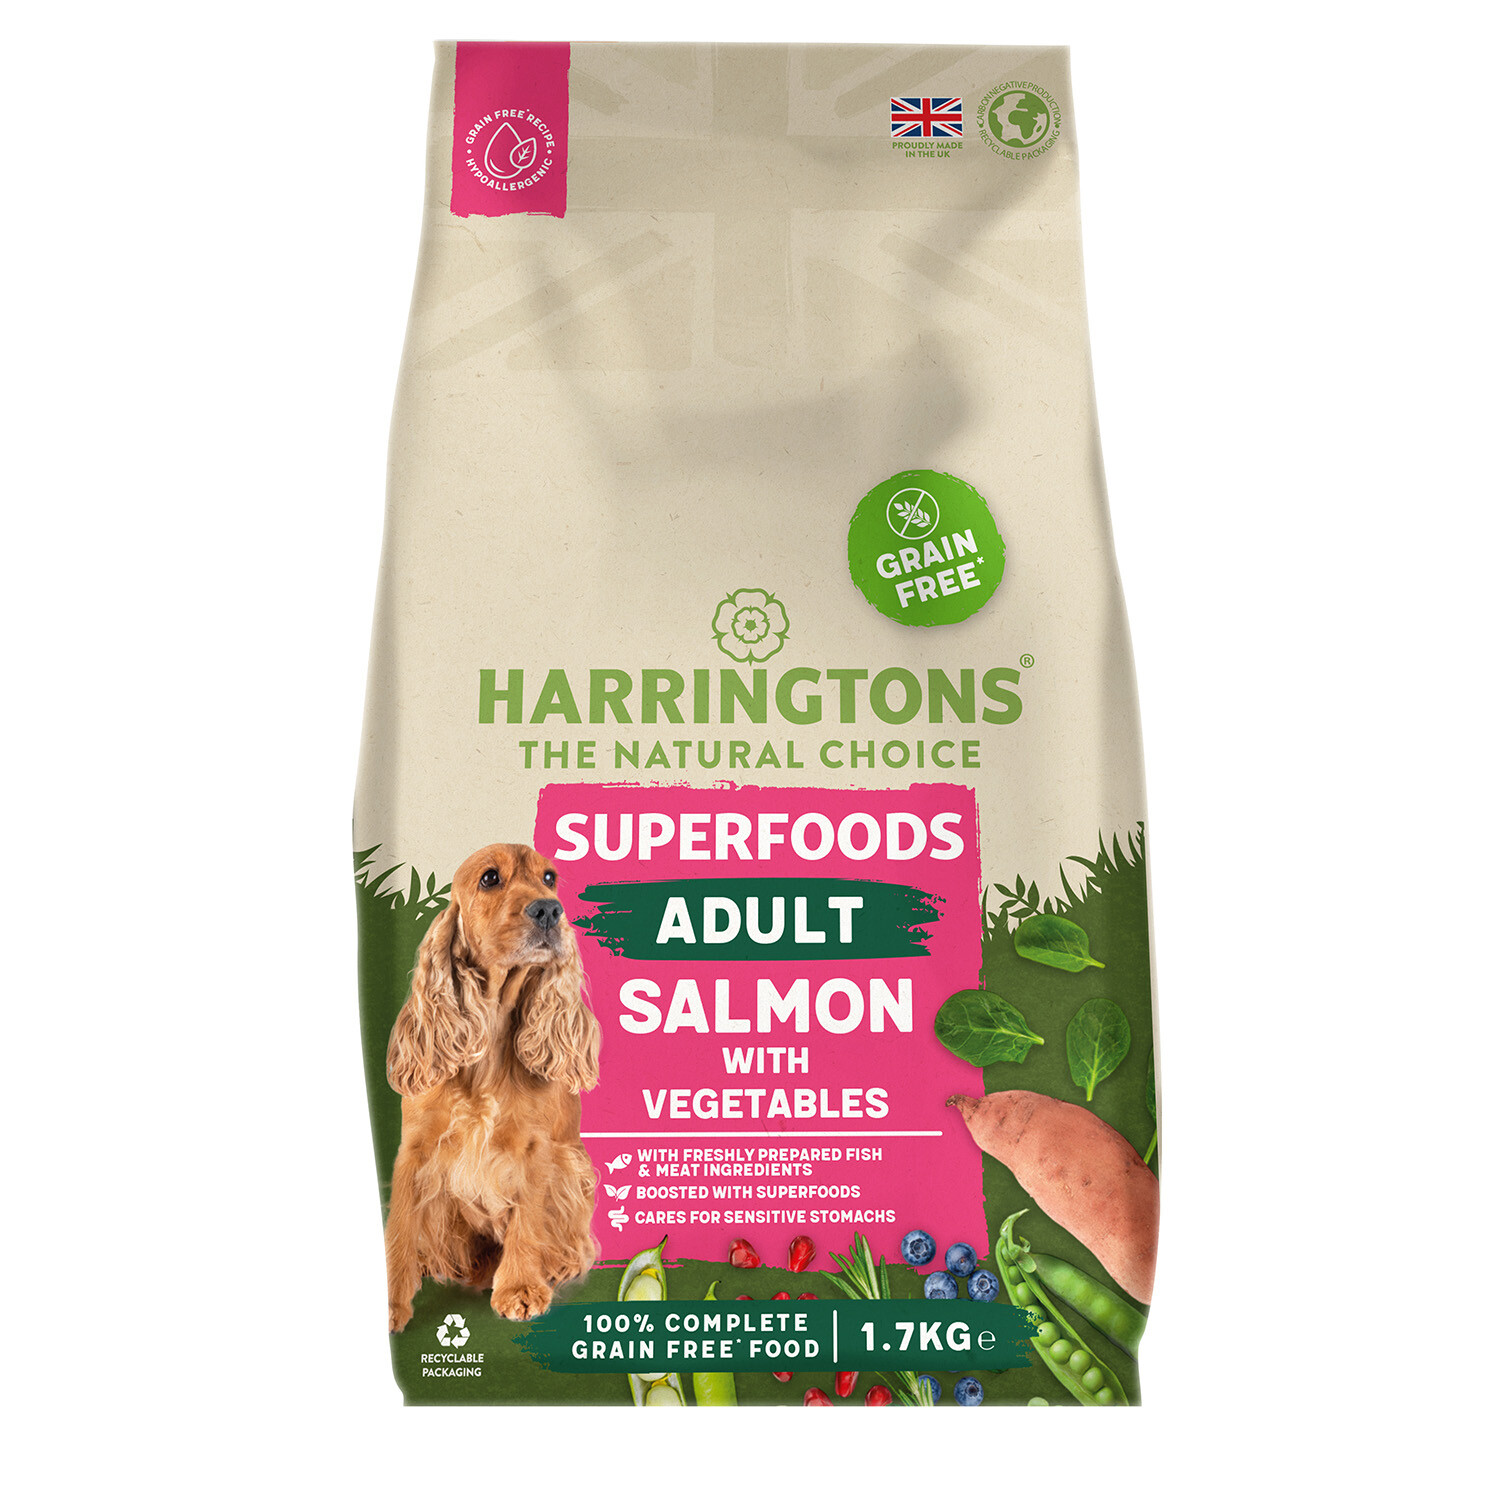 Harringtons Superfoods Dry Dog Food - Salmon with Vegetables Image